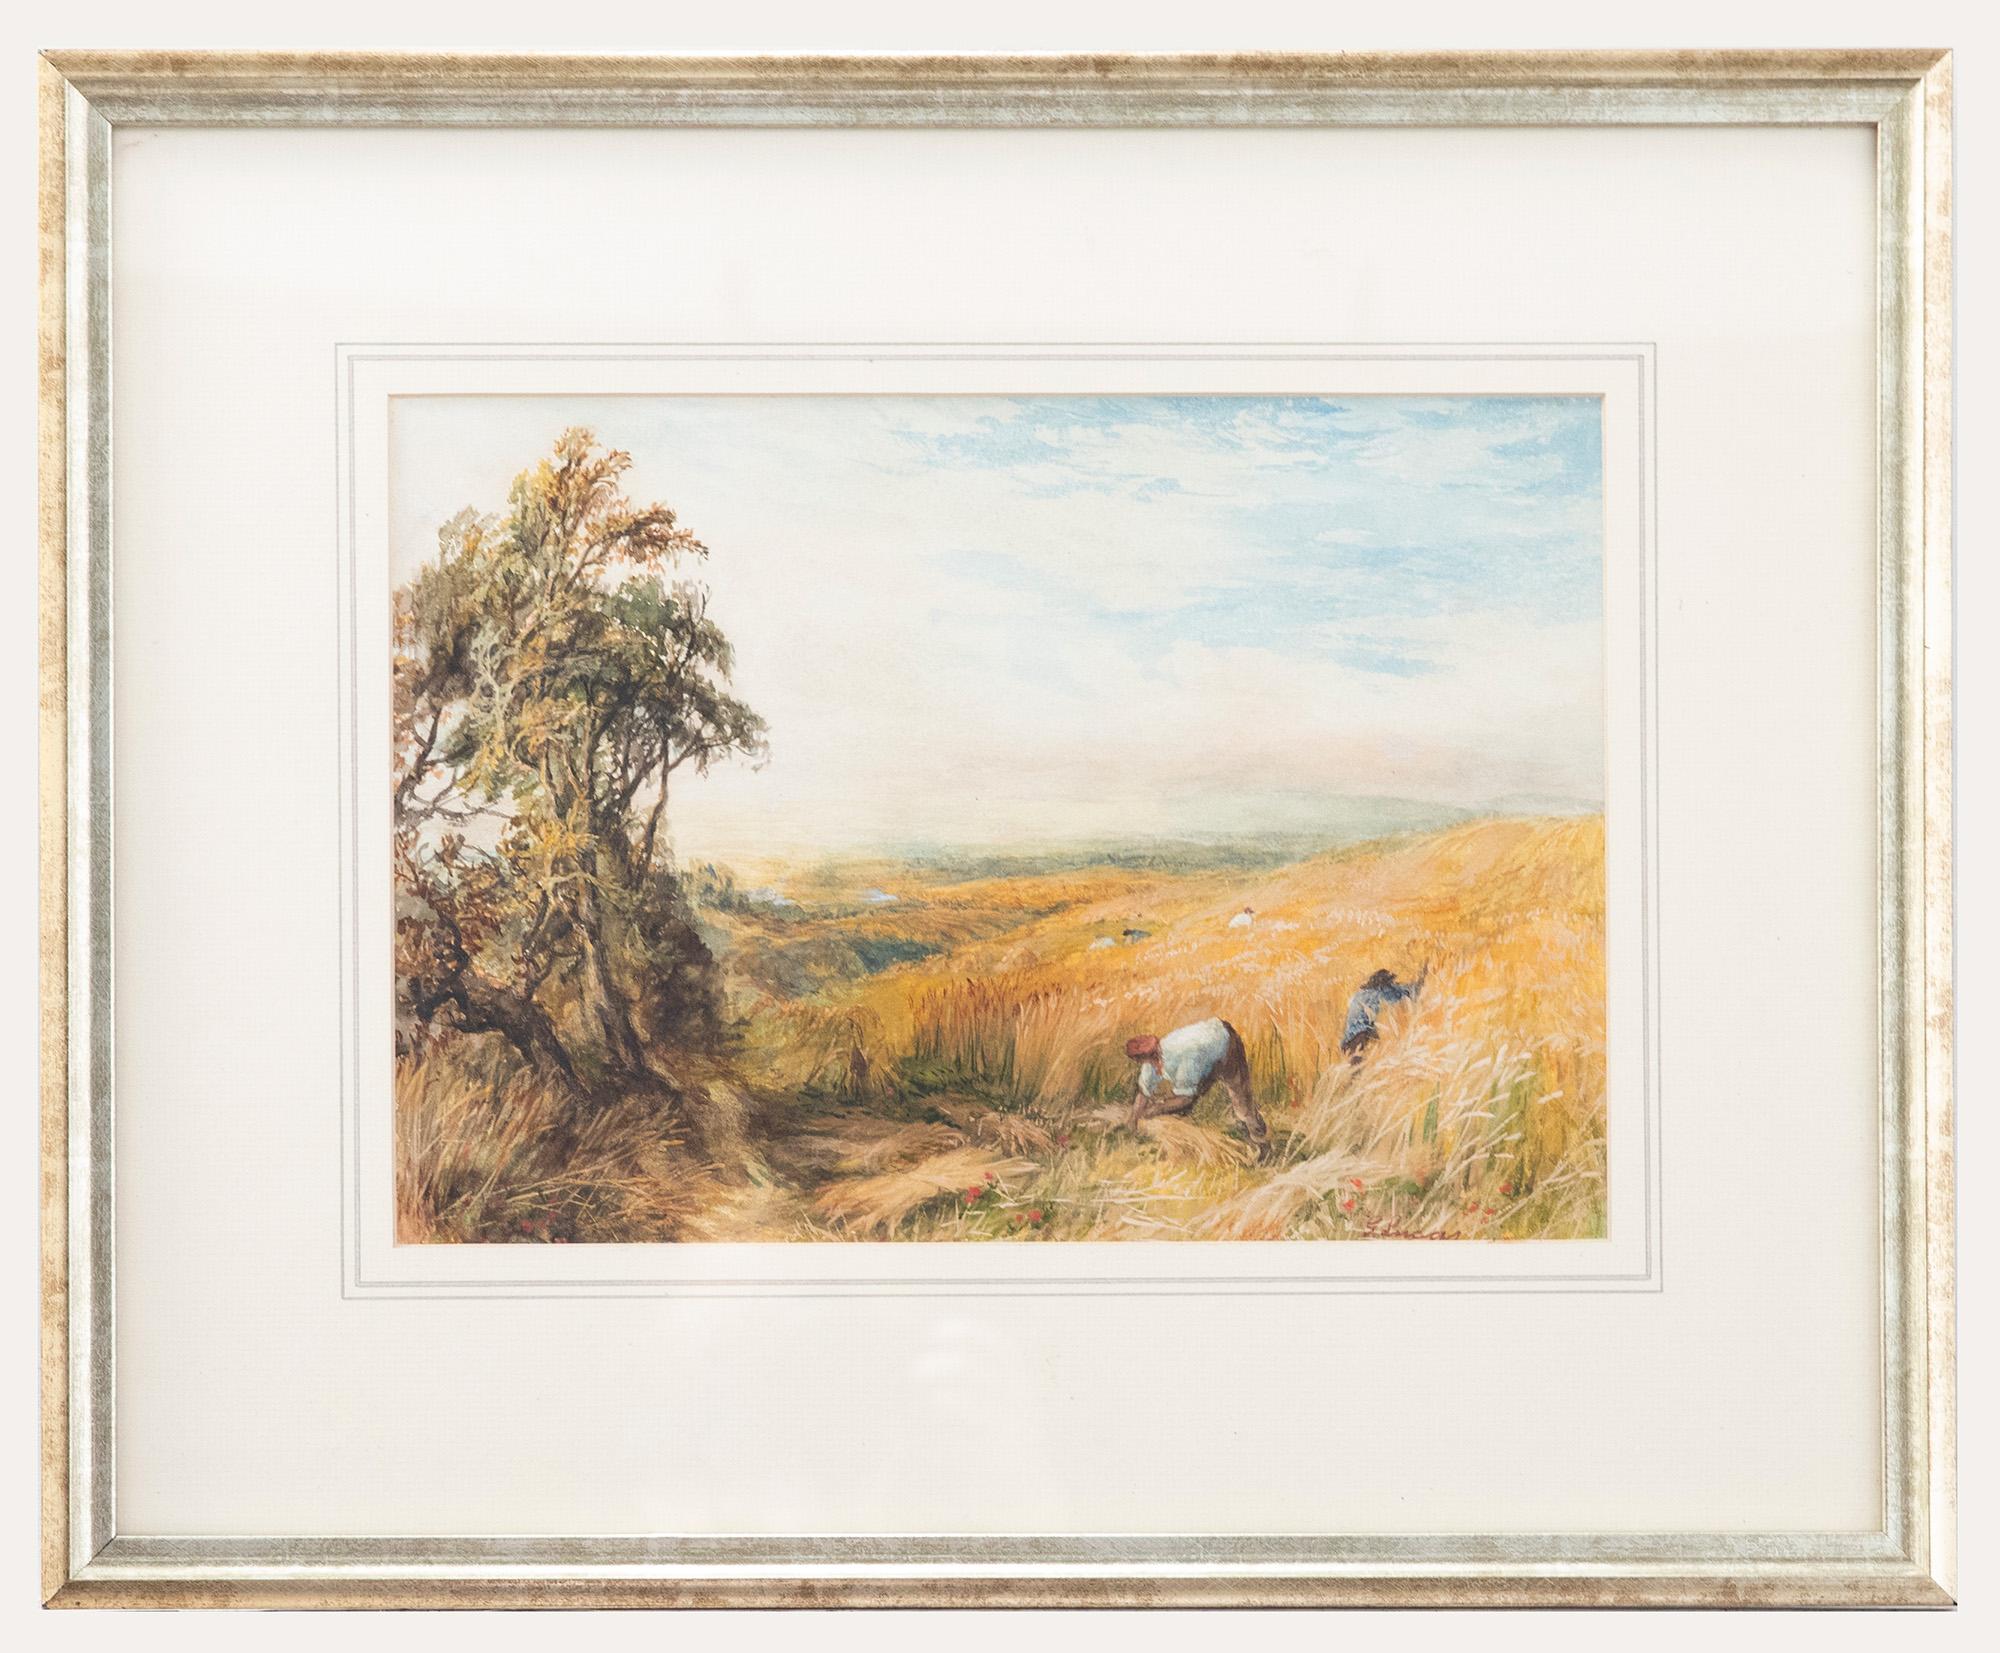 A fine watercolour study depicting workers reaping wheat at harvest time. The worker s gather their crops in the long wheat amongst poppy flowers. The scene looks over a vast valley with rivers flowing into the distance. Signed to the lower right.